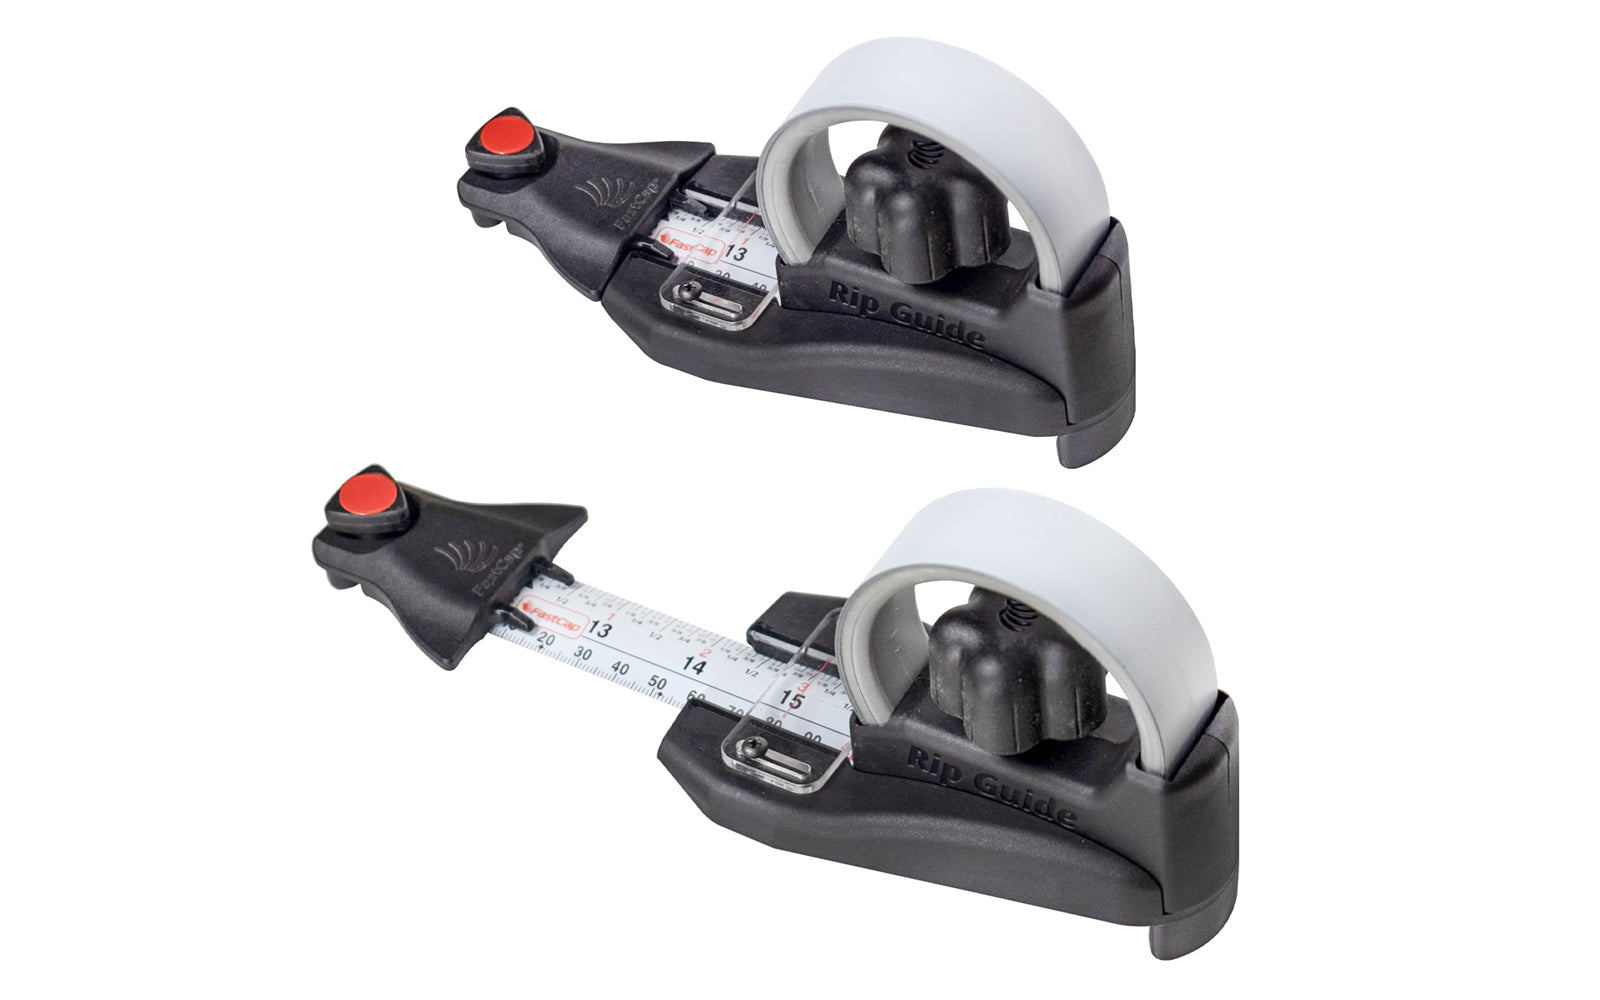 FastCap Rip Guide has a compact design that helps make quick, accurate, & repeatable measurements for your track saw. Simply slide the Rip Guide into the fence’s “T-track,” measure your cut, & saw away. For initial set up dial sight glass to your specific fence. 2 pack. Metric / Standard tape measure. 663807030498